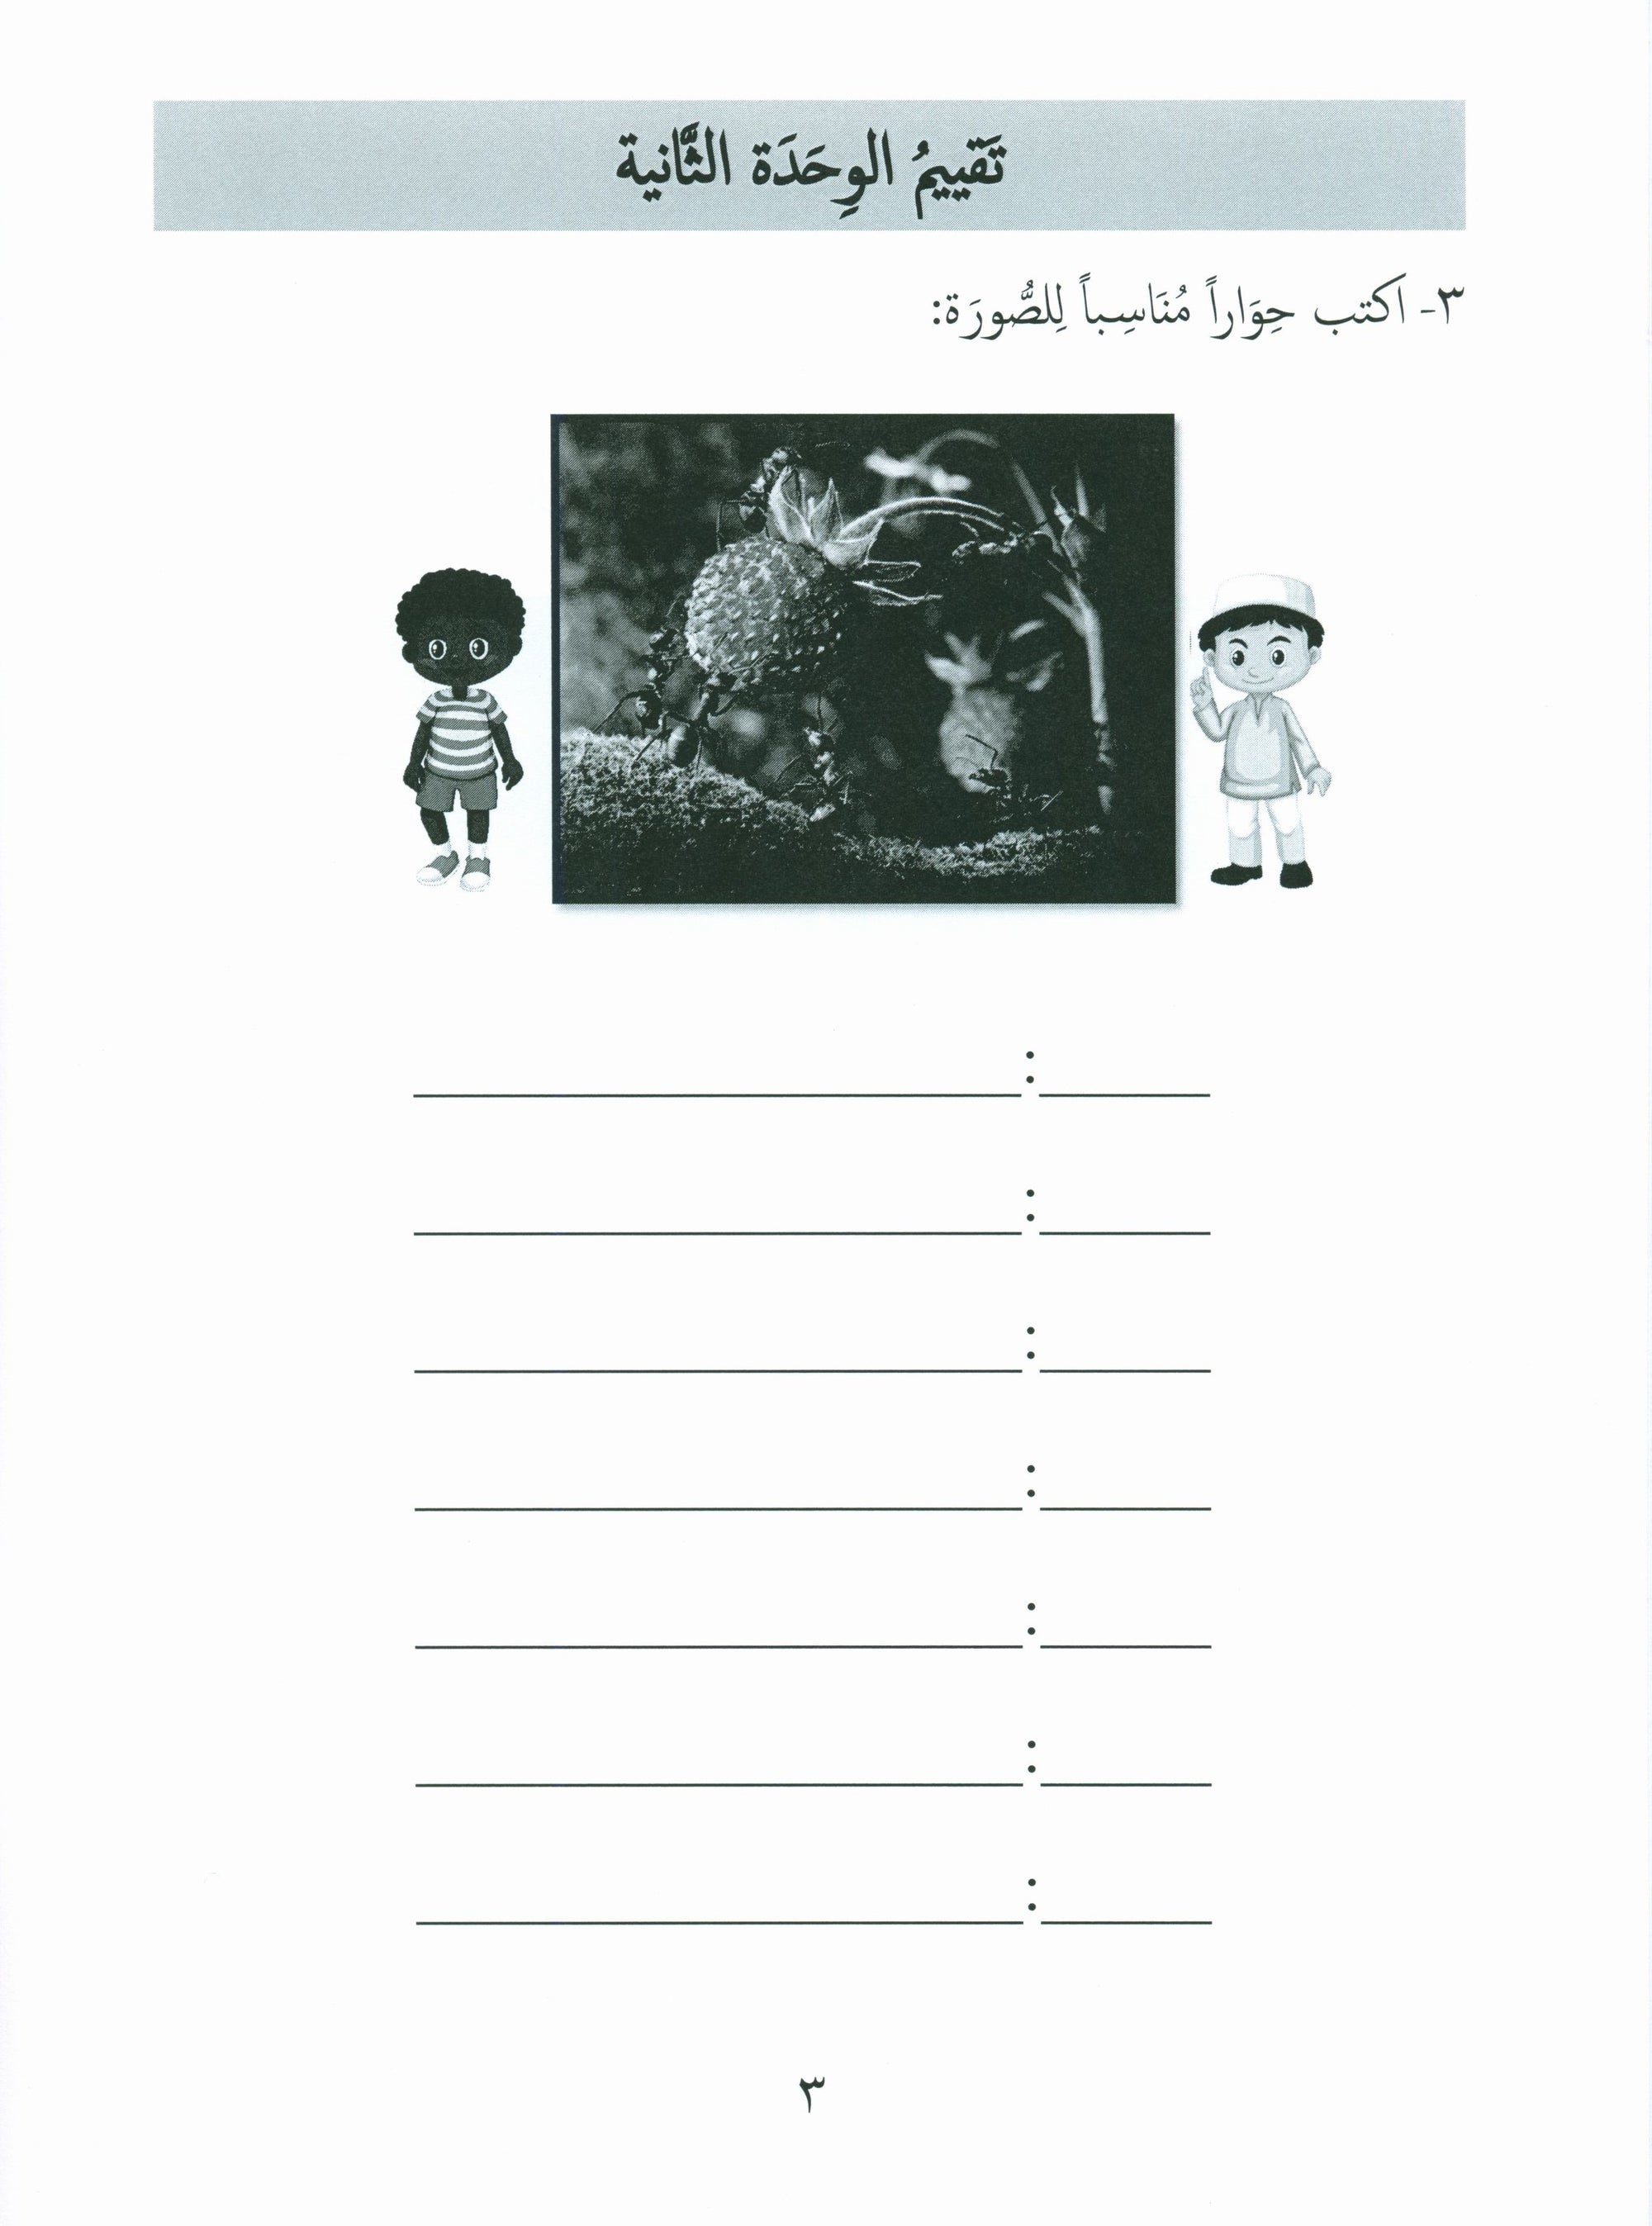 Our Language Is Our Pride Assessment Level 5 لغتنا فخرنا